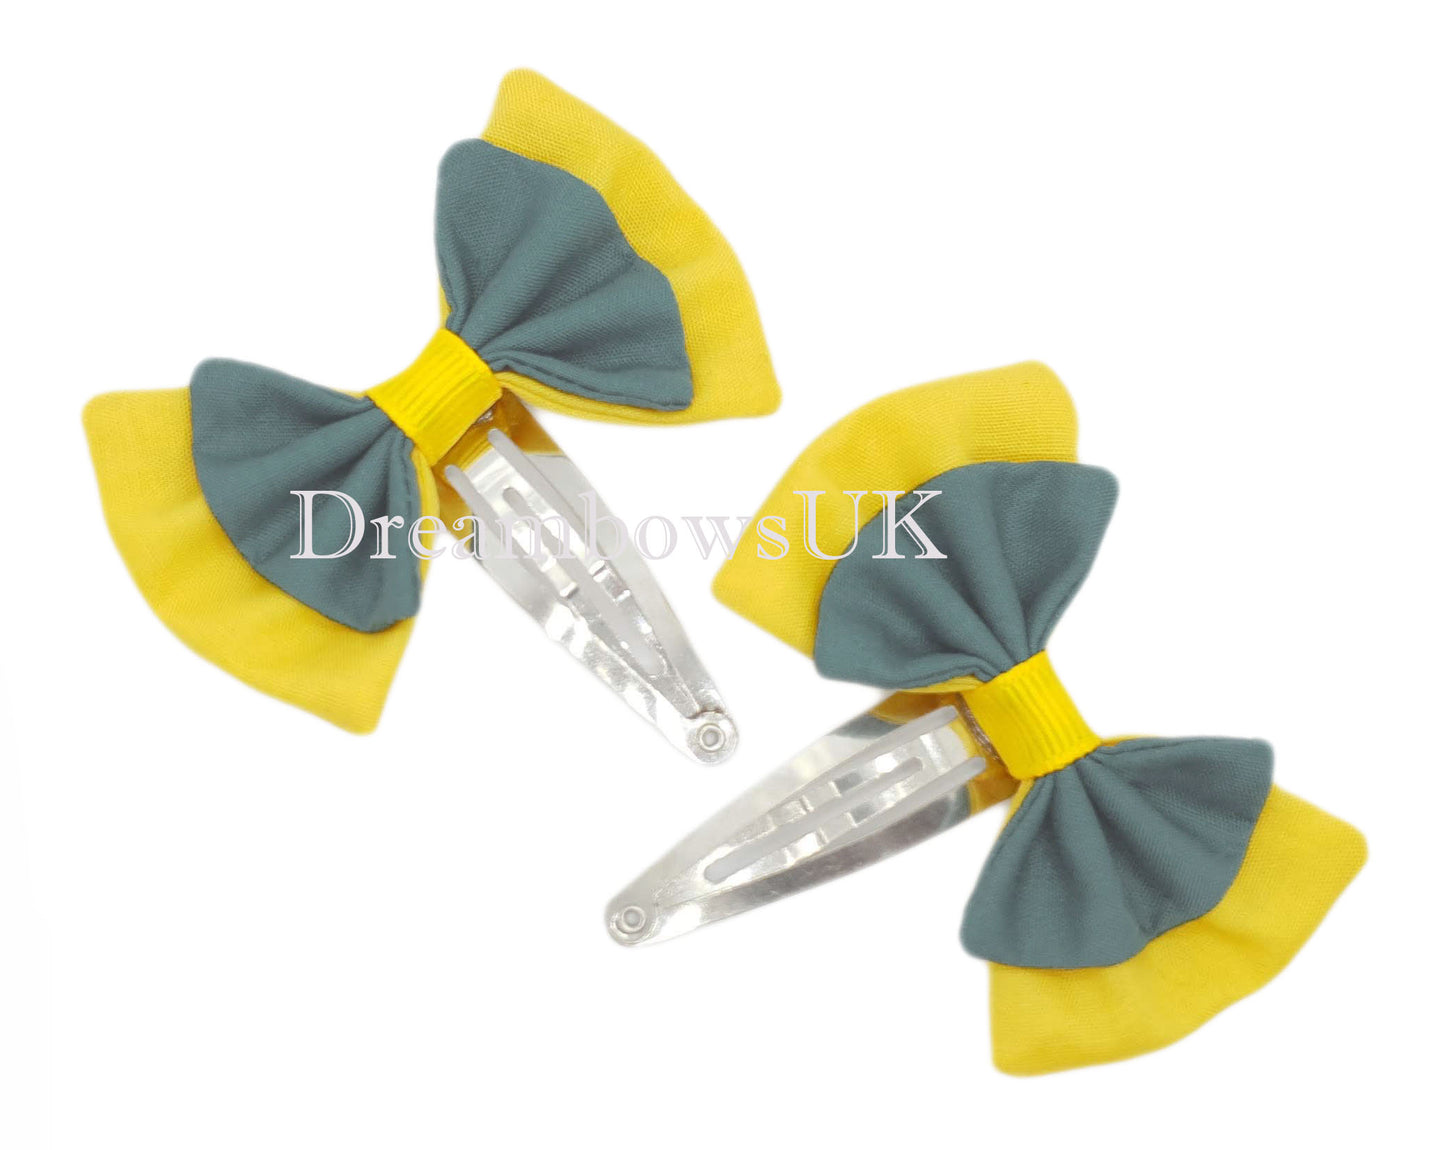 2x Grey and golden yellow fabric hair bows